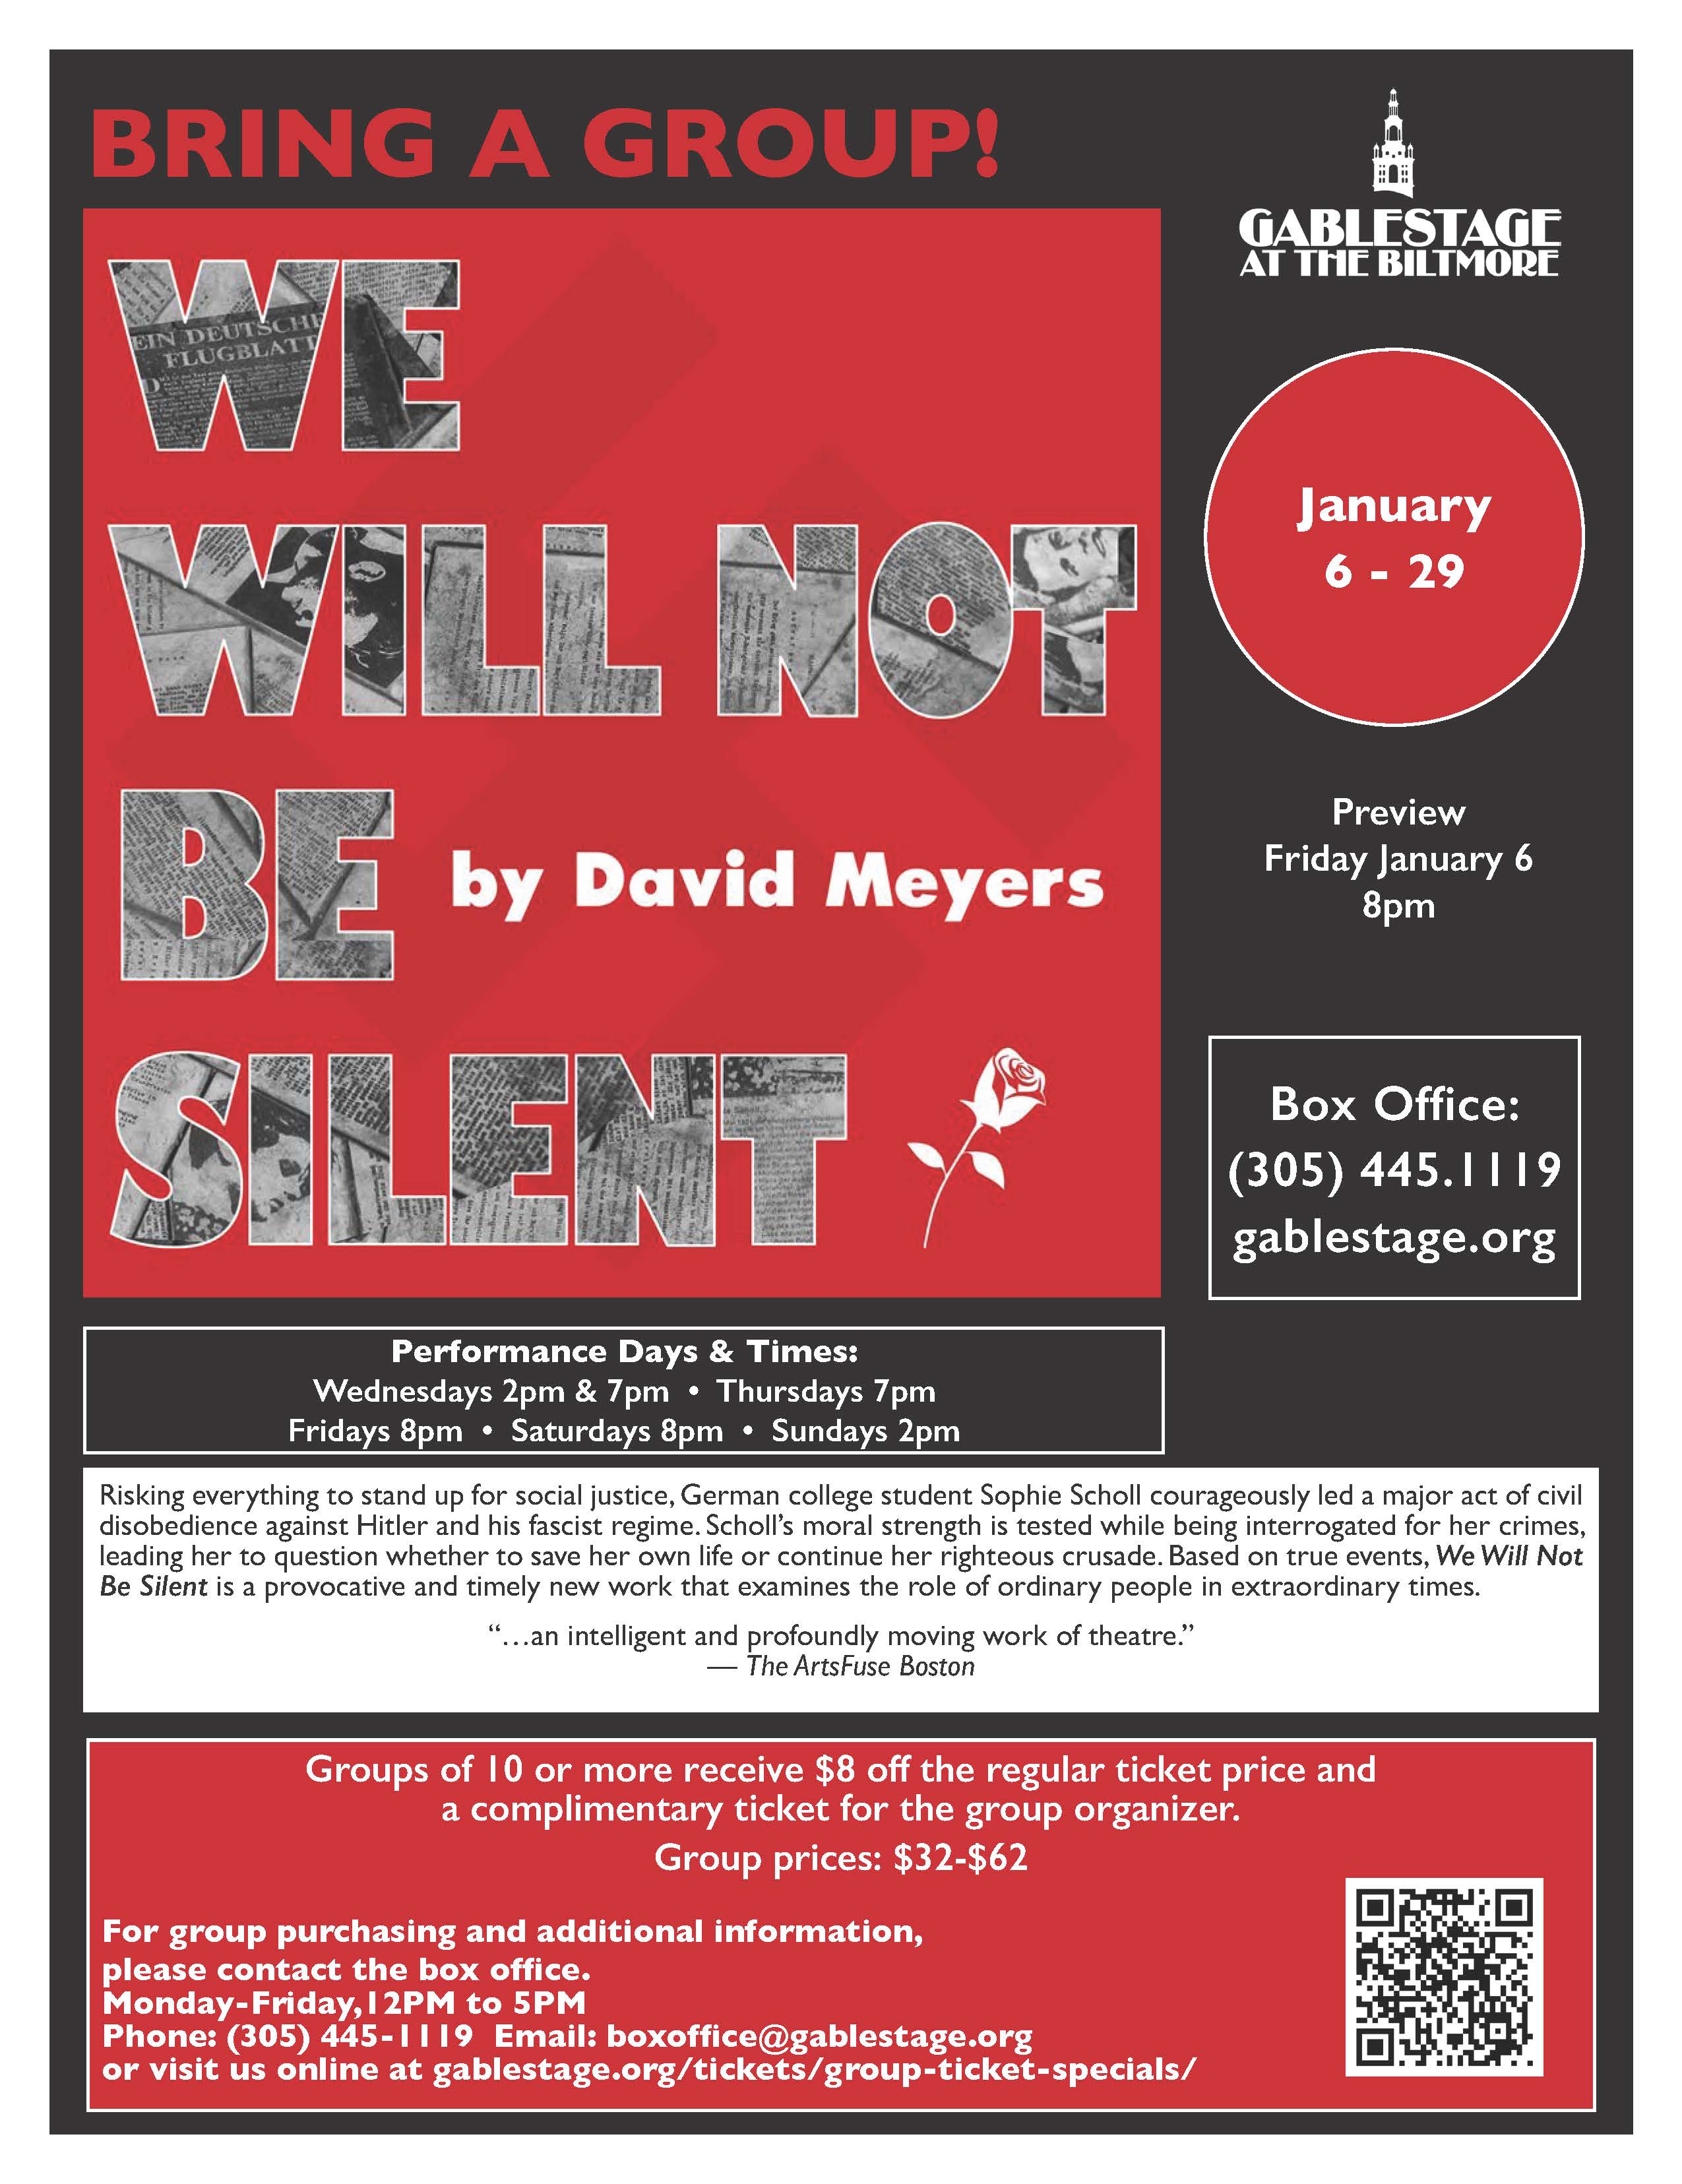 We Will Not Be Silent Flyer